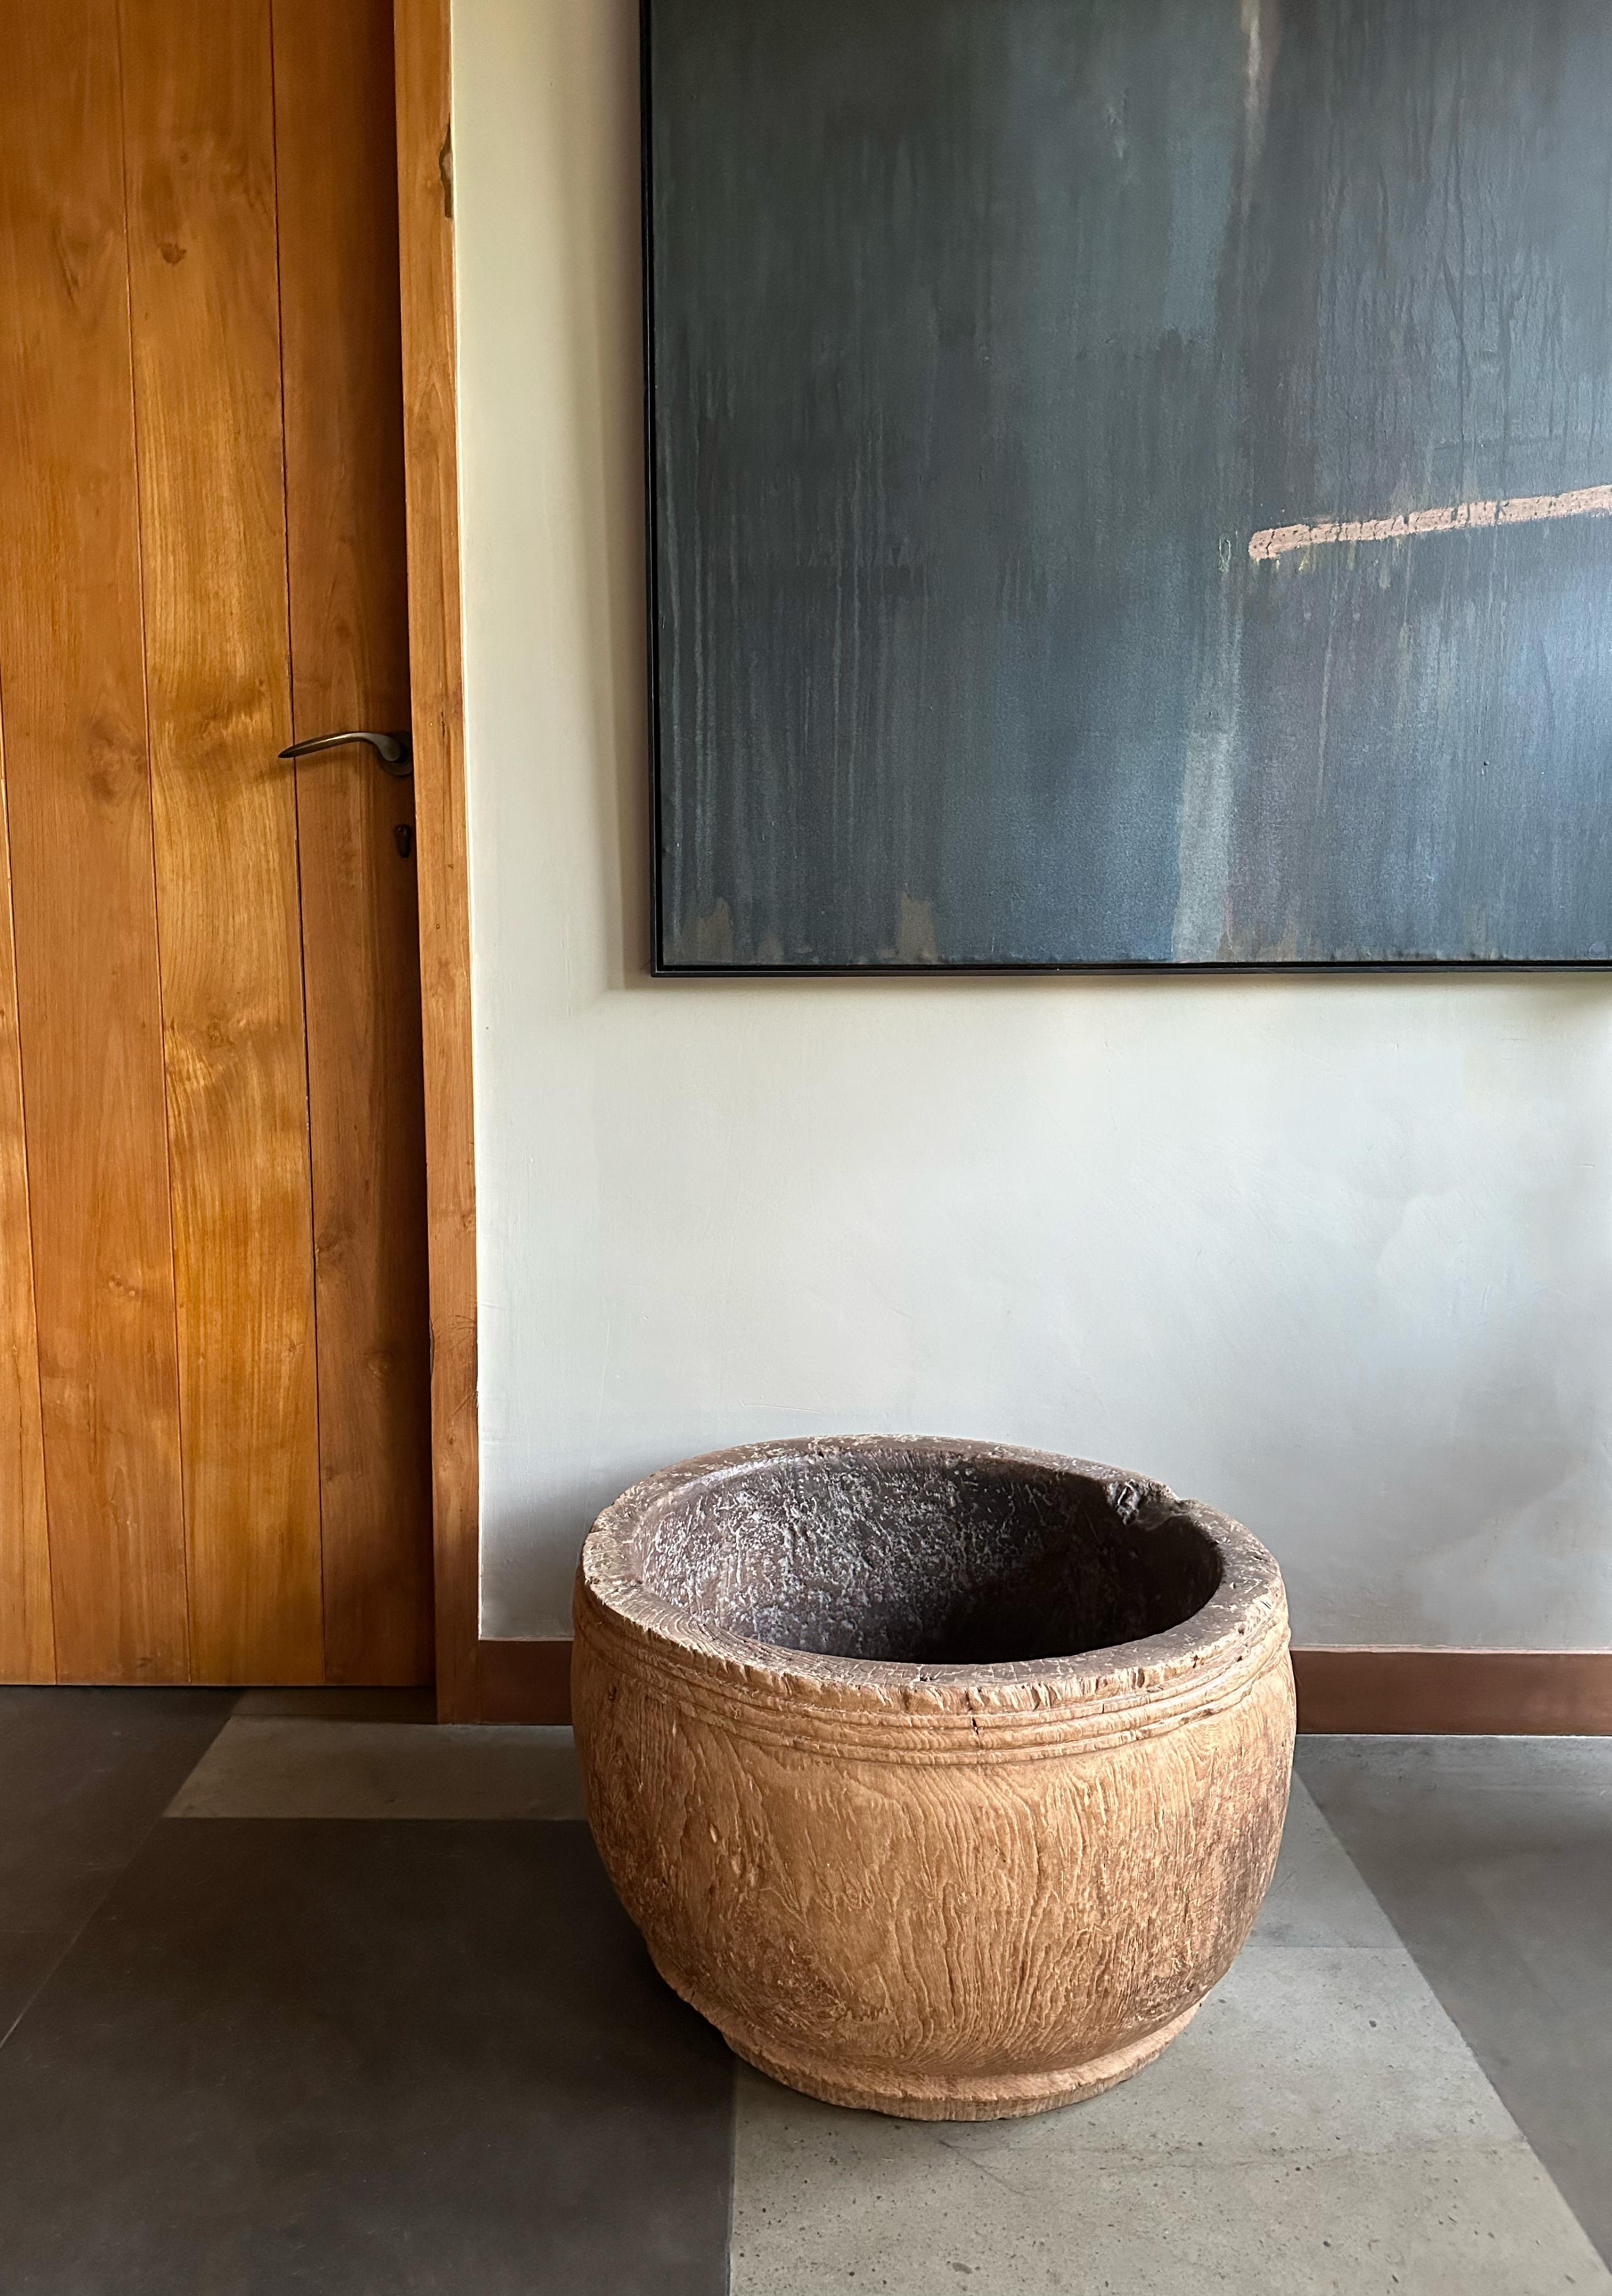 A large teak wood bowl crafted on the island of Java, Indonesia. The bowl was cut from a much larger slab of teak wood and maintains an organic shape and natural textures. The subtle carved detailing that runs the circumference of the bowl adds to